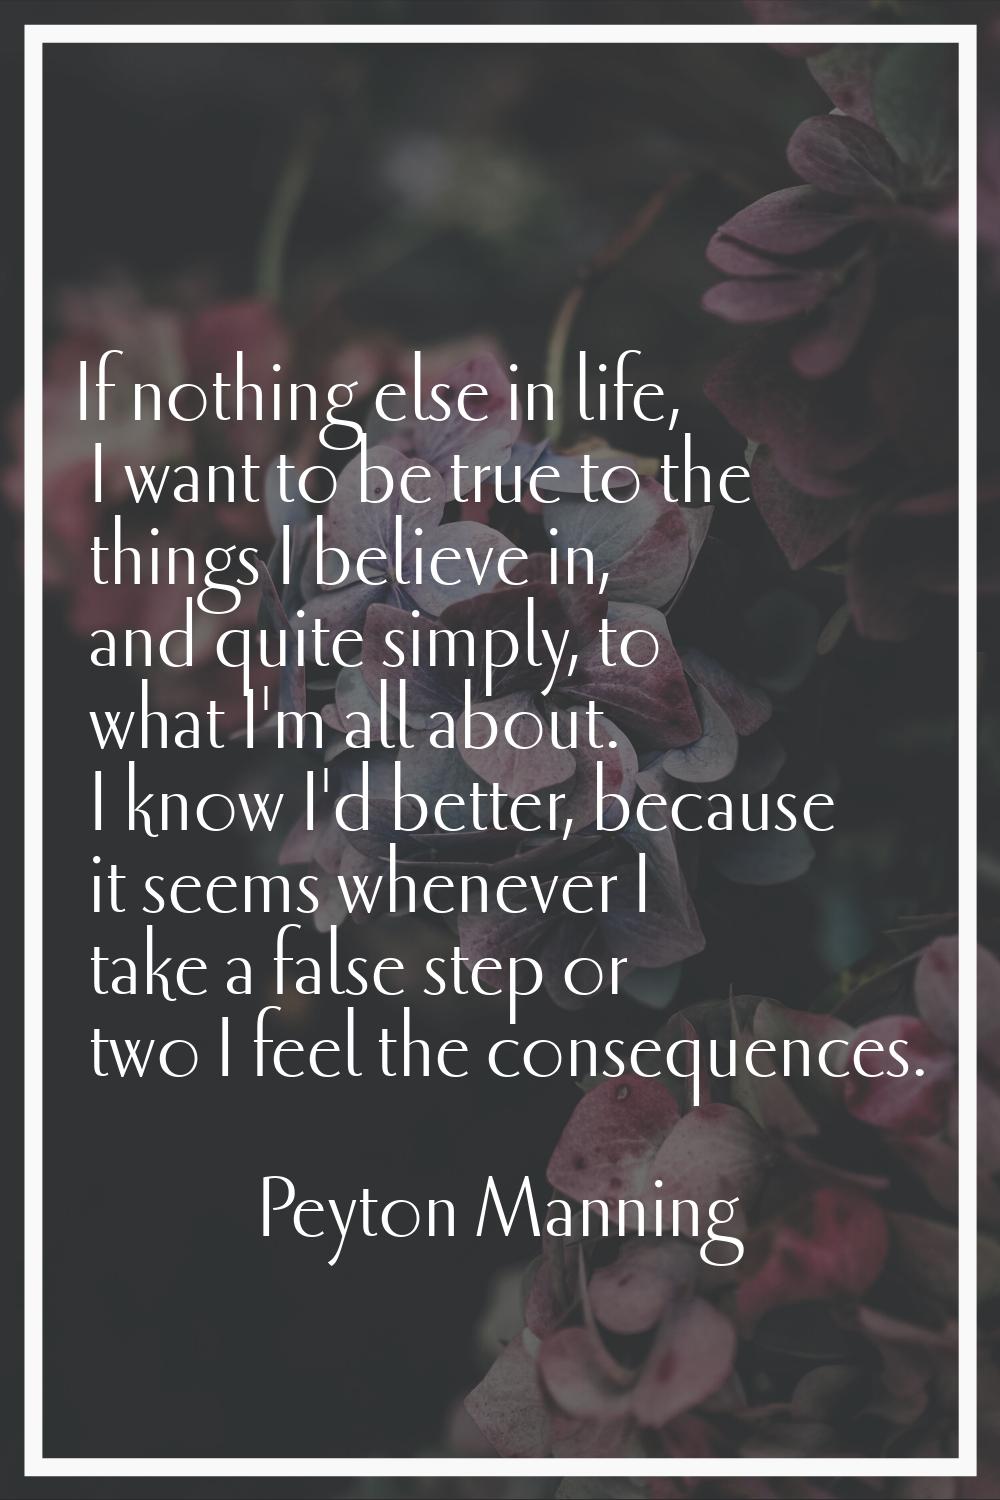 If nothing else in life, I want to be true to the things I believe in, and quite simply, to what I'